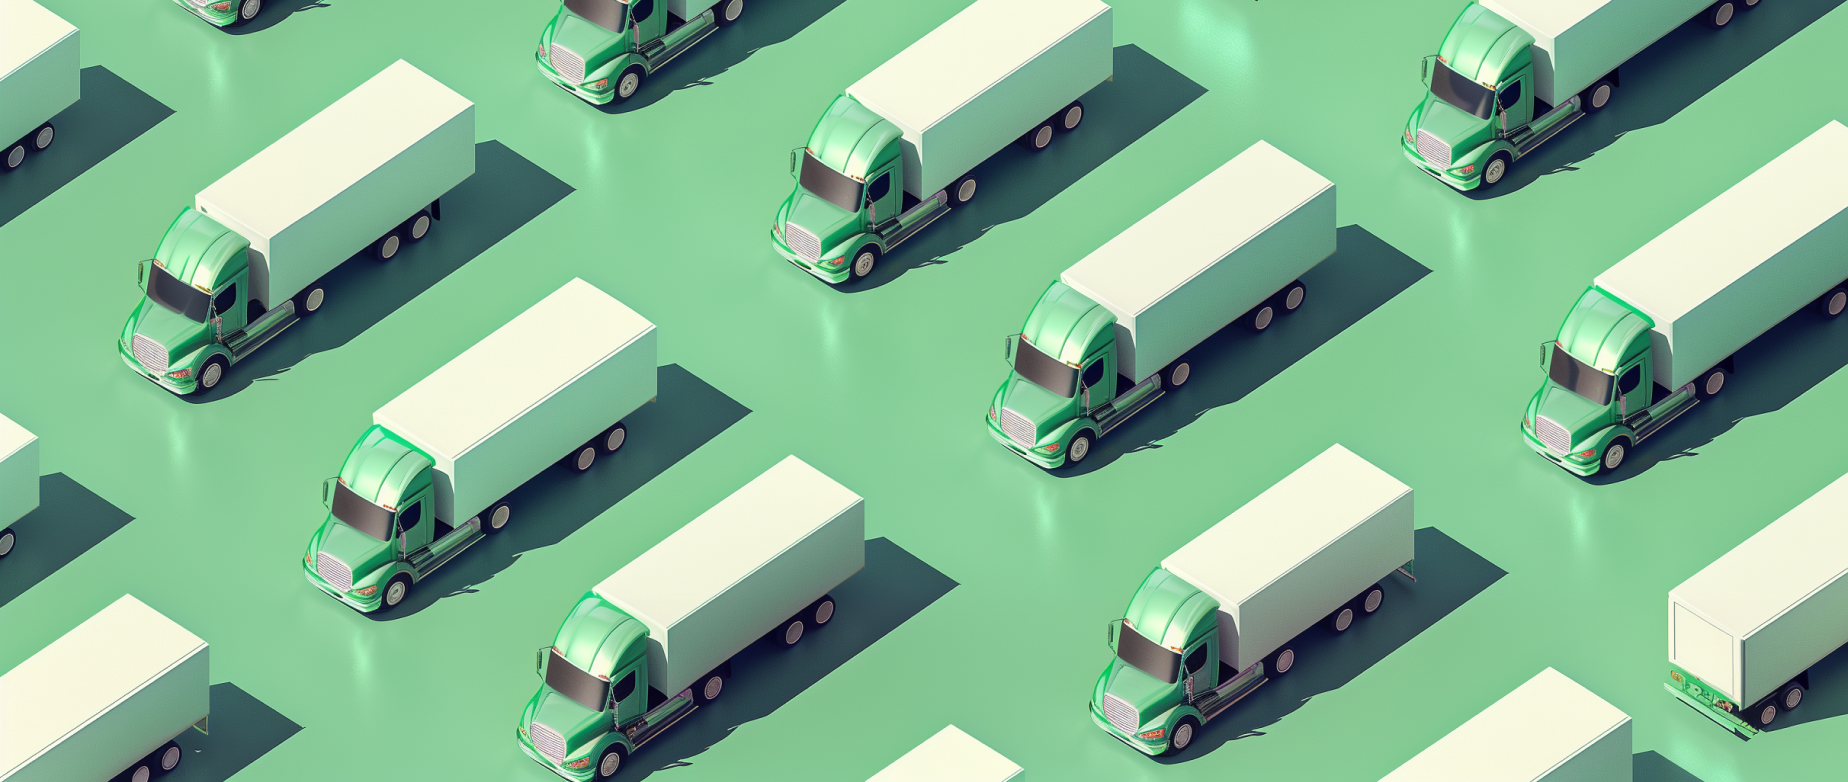 Rows of box trucks on a mint green background.